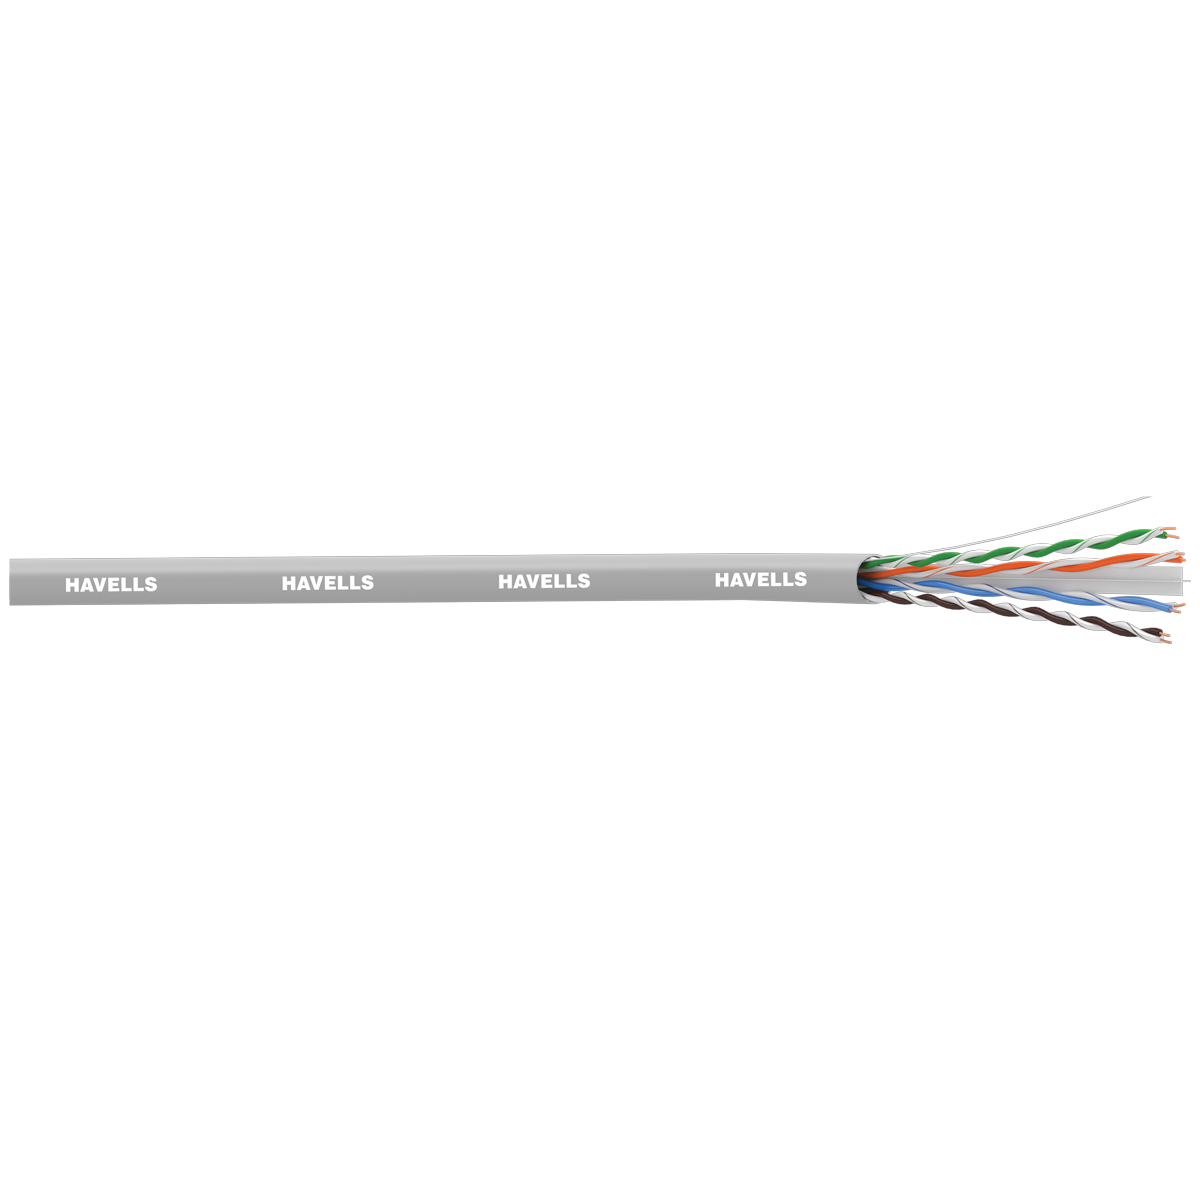 Havells Computer LAN Network Cable Electrolytic Grade Solid Annealed Bare Copper Conductor Cable 305m